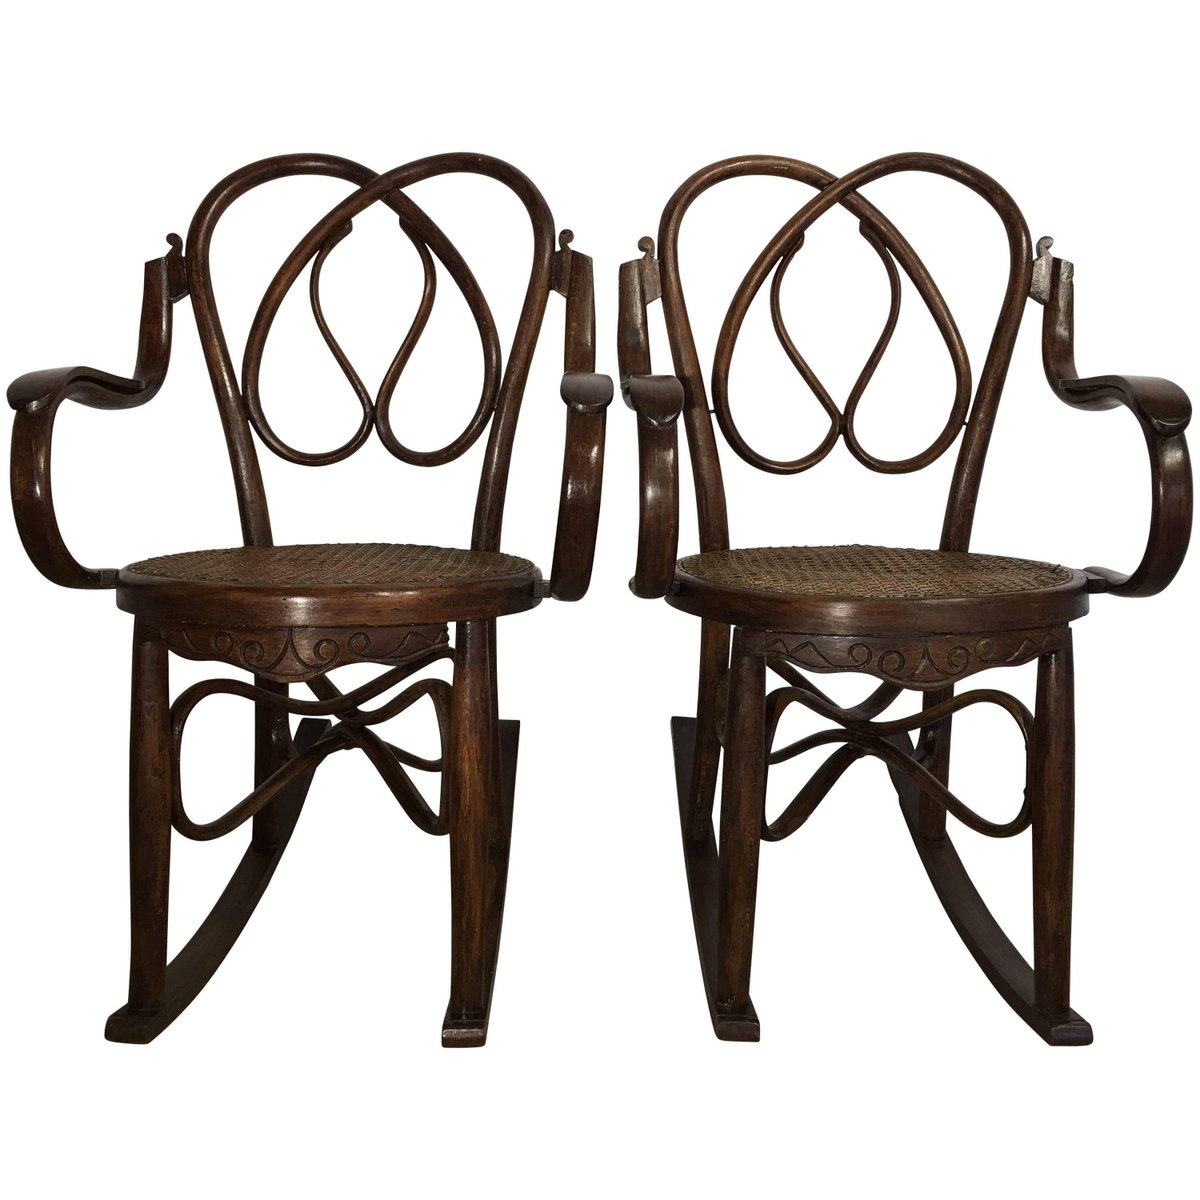 19th century bentwood rocking chairs in style of jacob josef set of 2 PSK-1003262